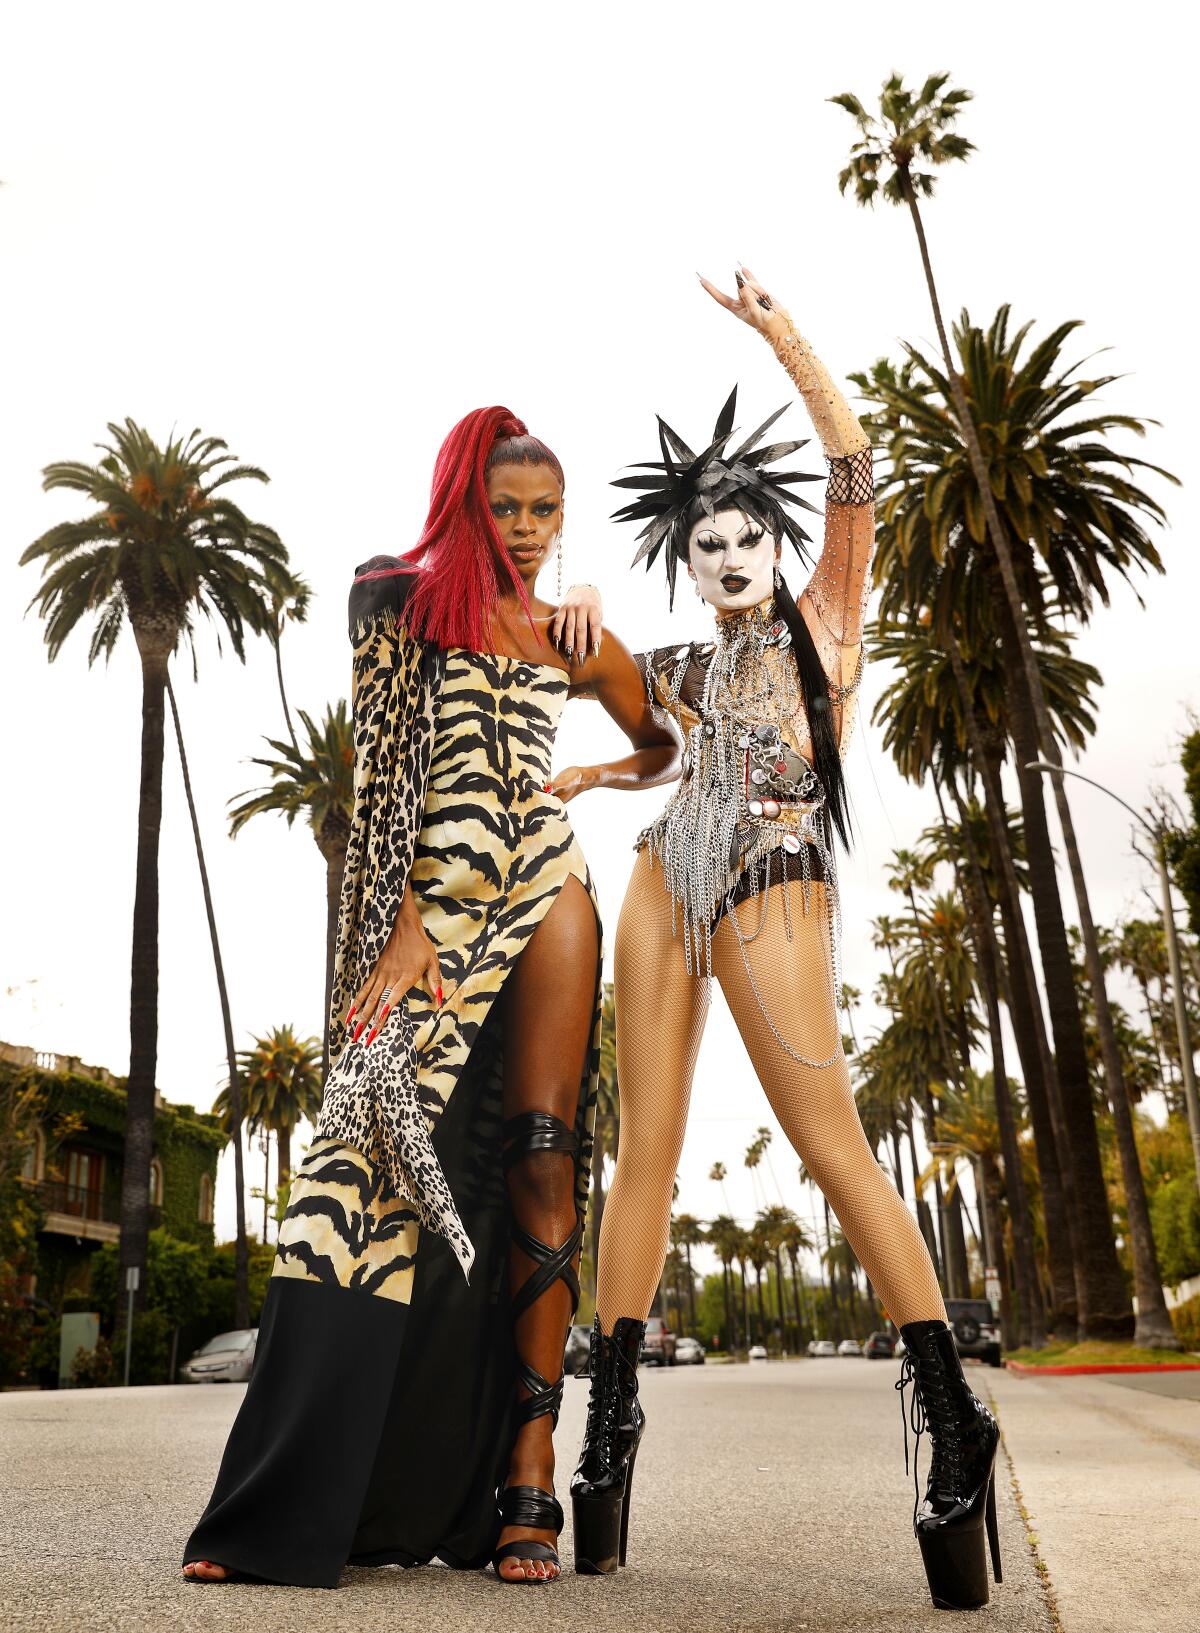 Drag queens Symone, left, and Gottmik of "RuPaul's Drag Race." They were photographed in Beverly Hills on April 13, 2021